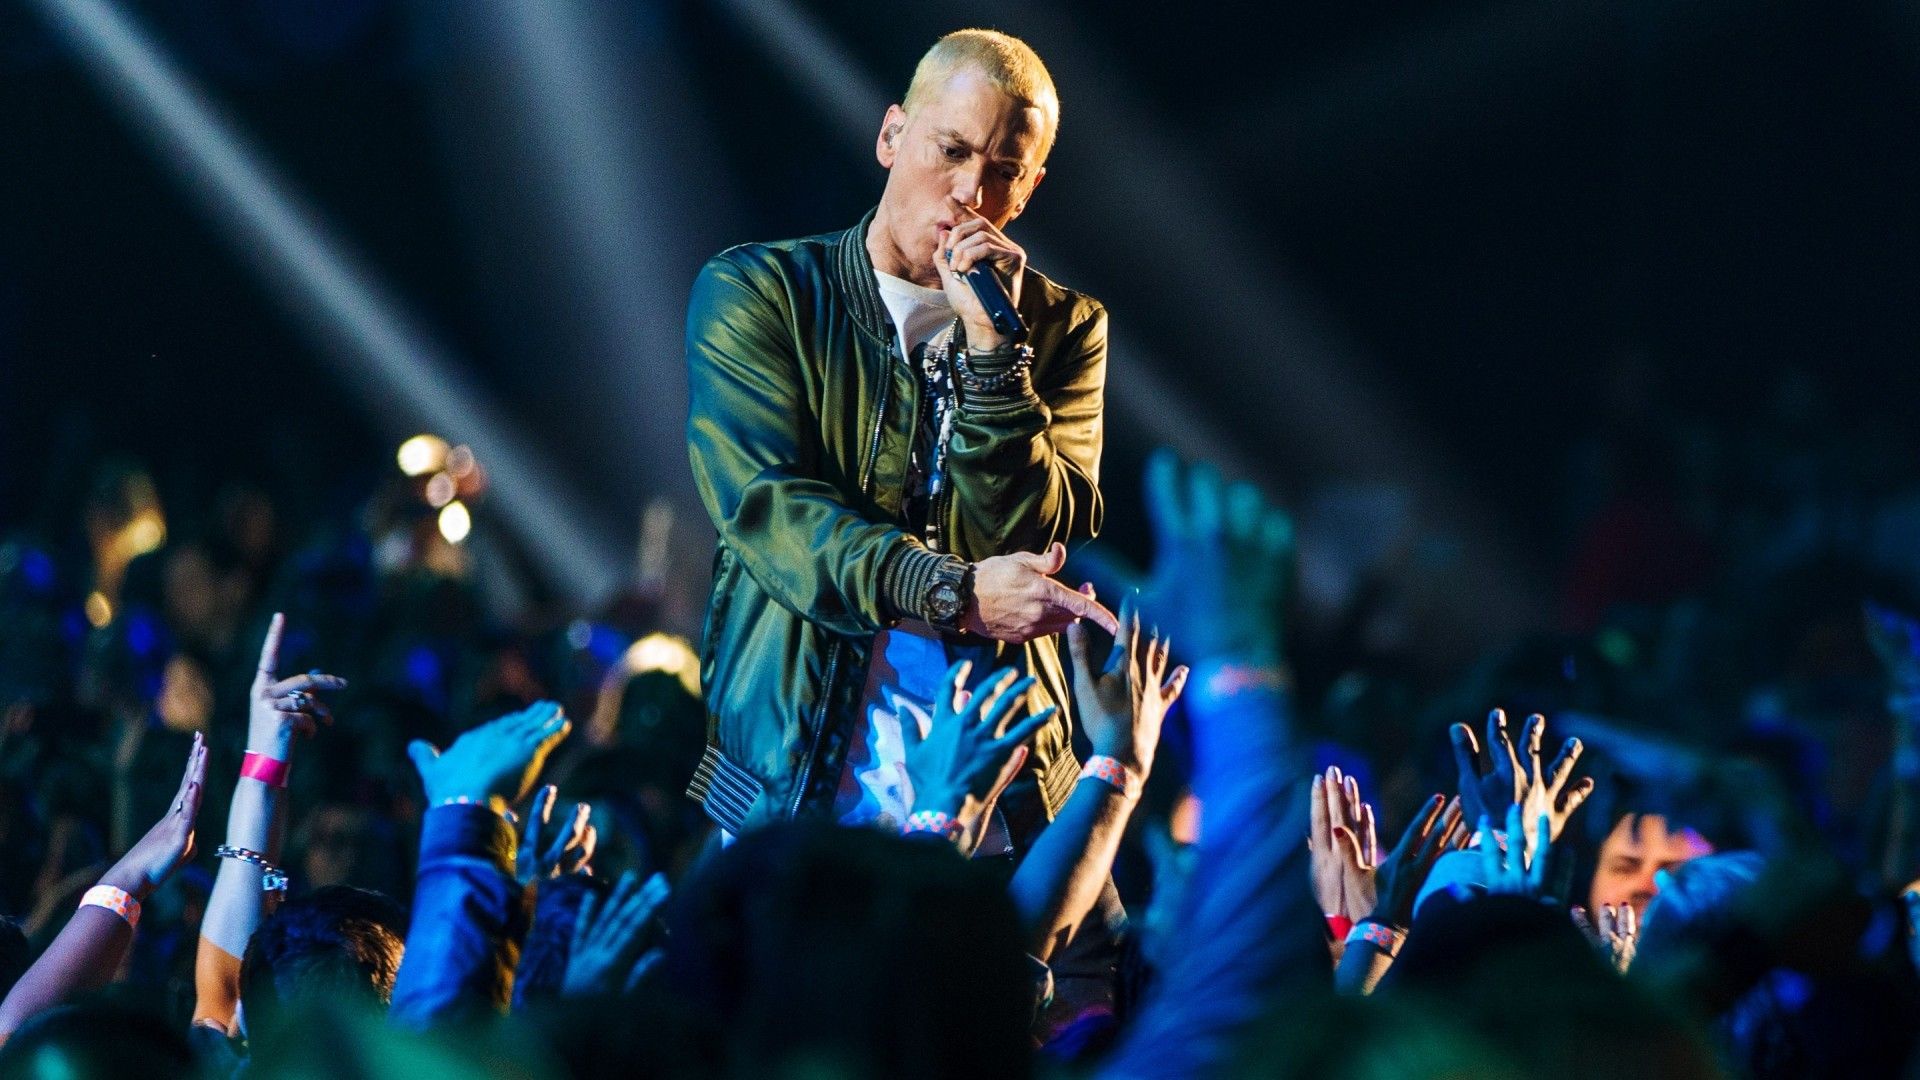 99 Eminem Wallpaper Hd For Pc For FREE - MyWeb